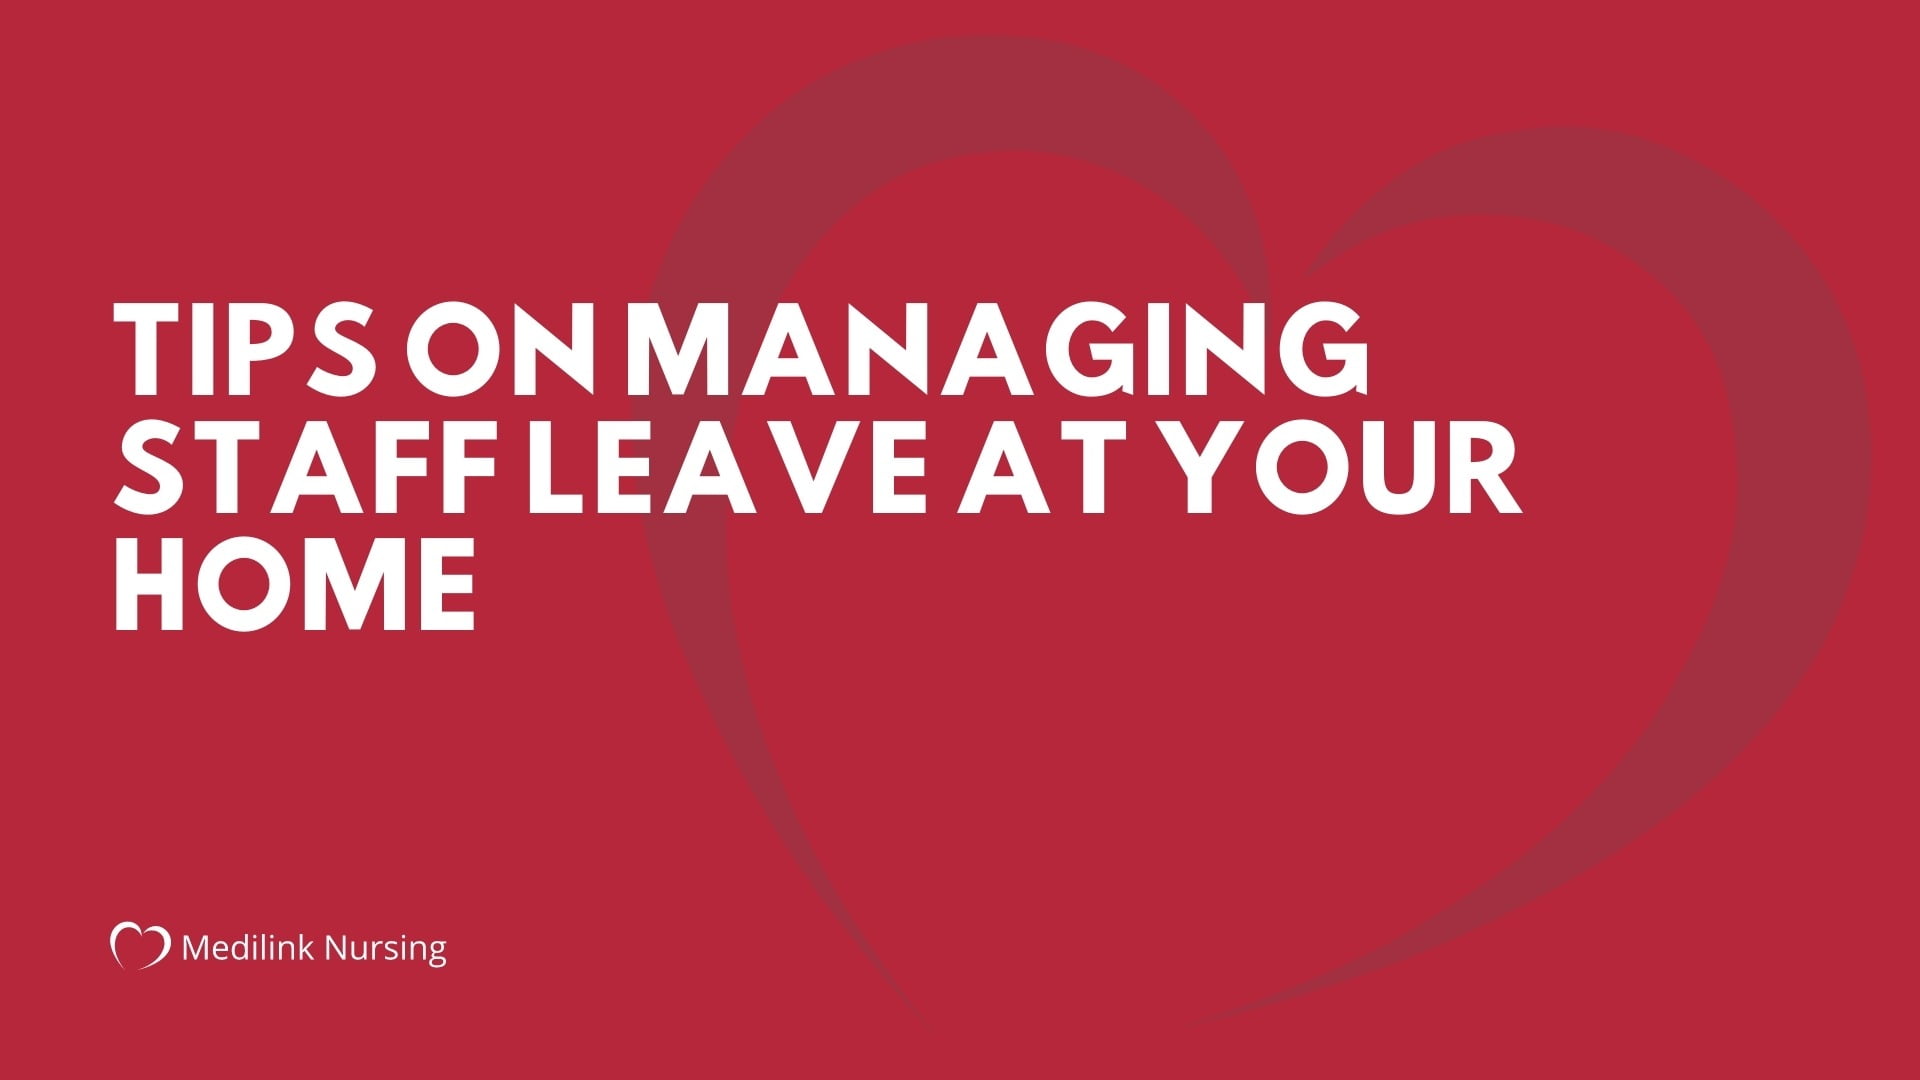 Tips On Managing Staff Leave At Your Home